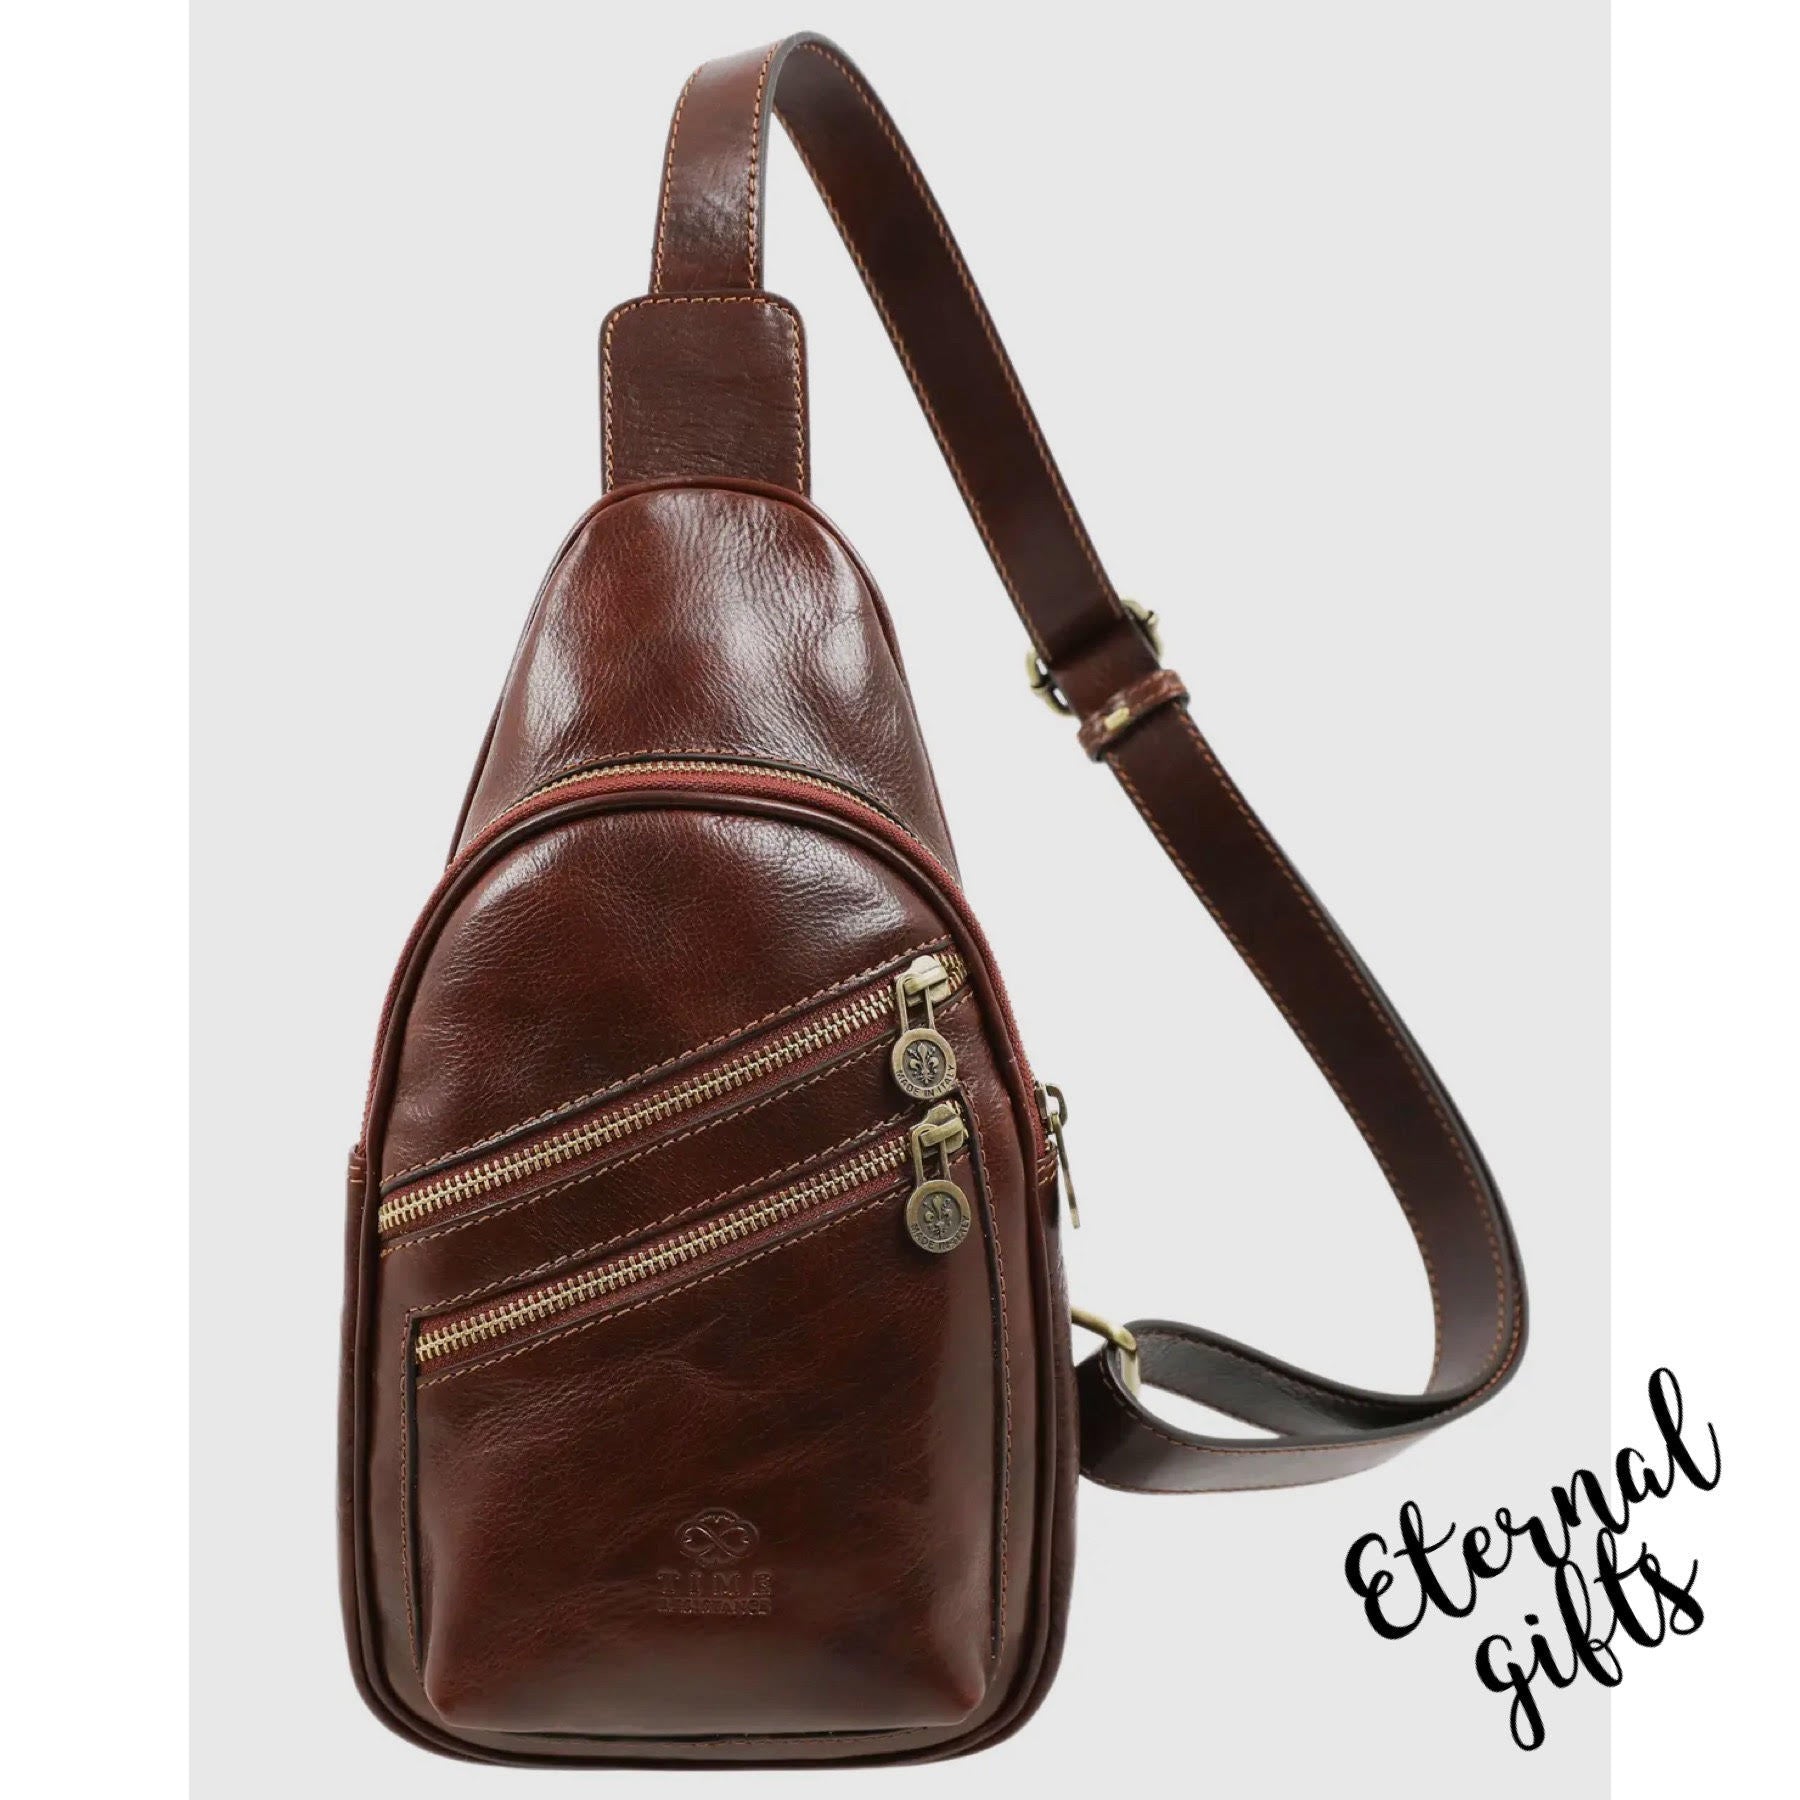 Brown Leather Cross Body Bag - Catch-22 by Time Resistance